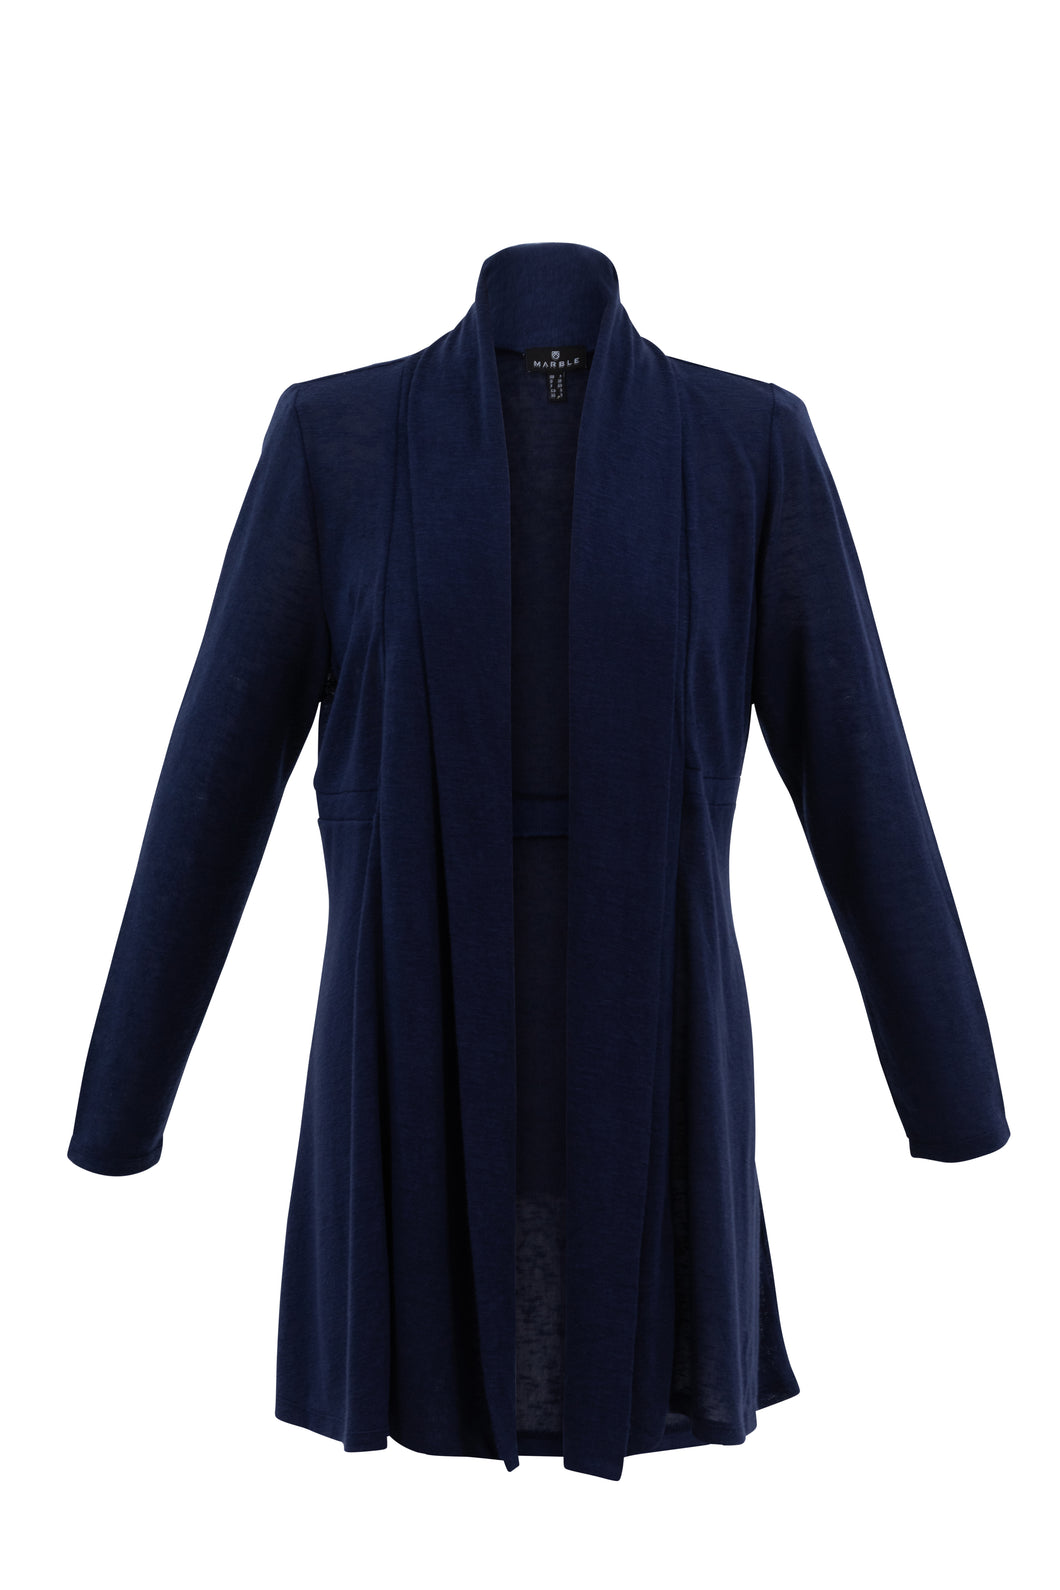 Marble Lightweight Long Sleeve Long Line Open Cardigan in Navy or White